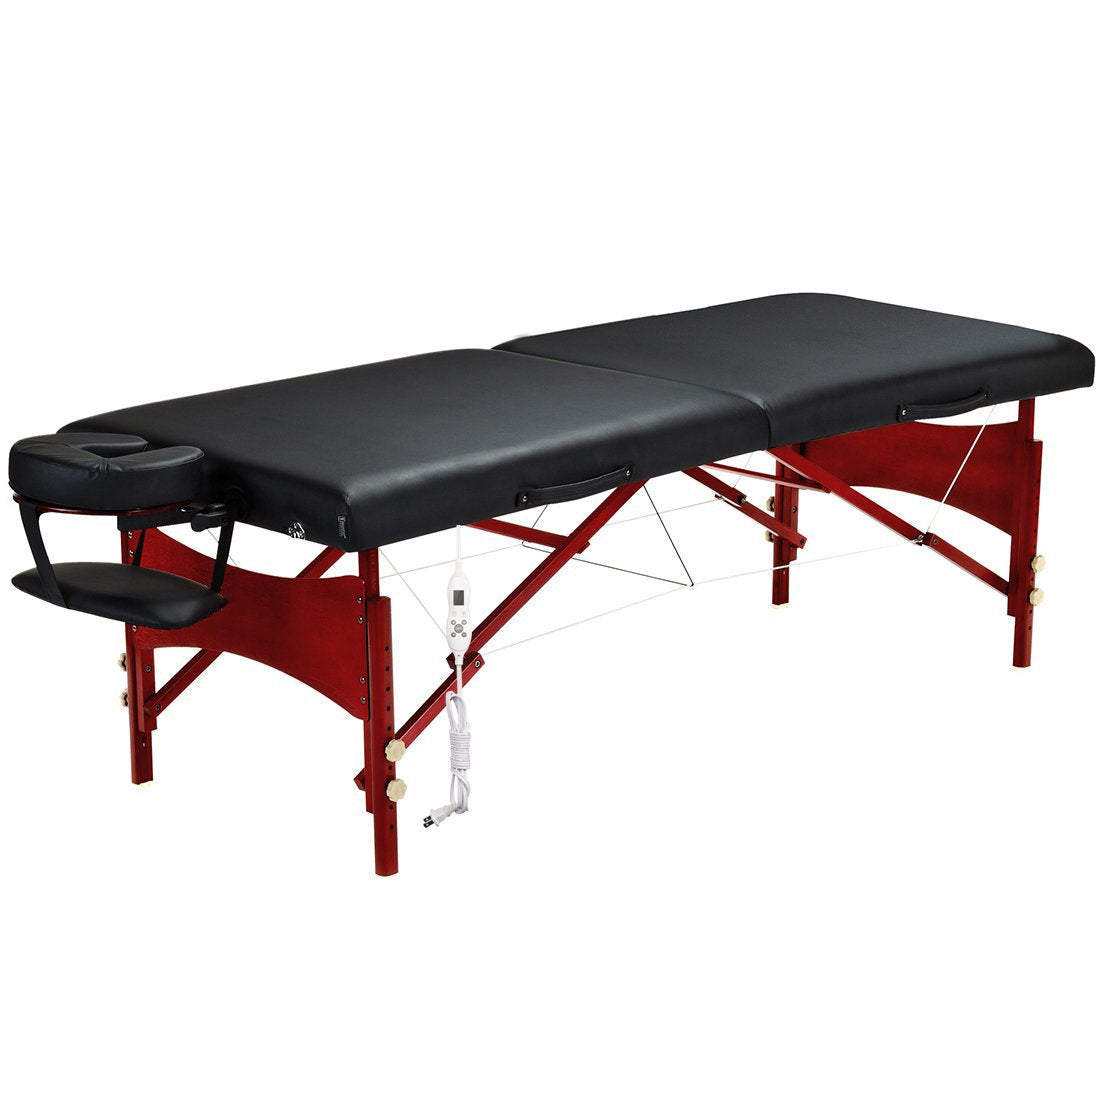 30" Roma II Portable Massage Table Deluxe Package